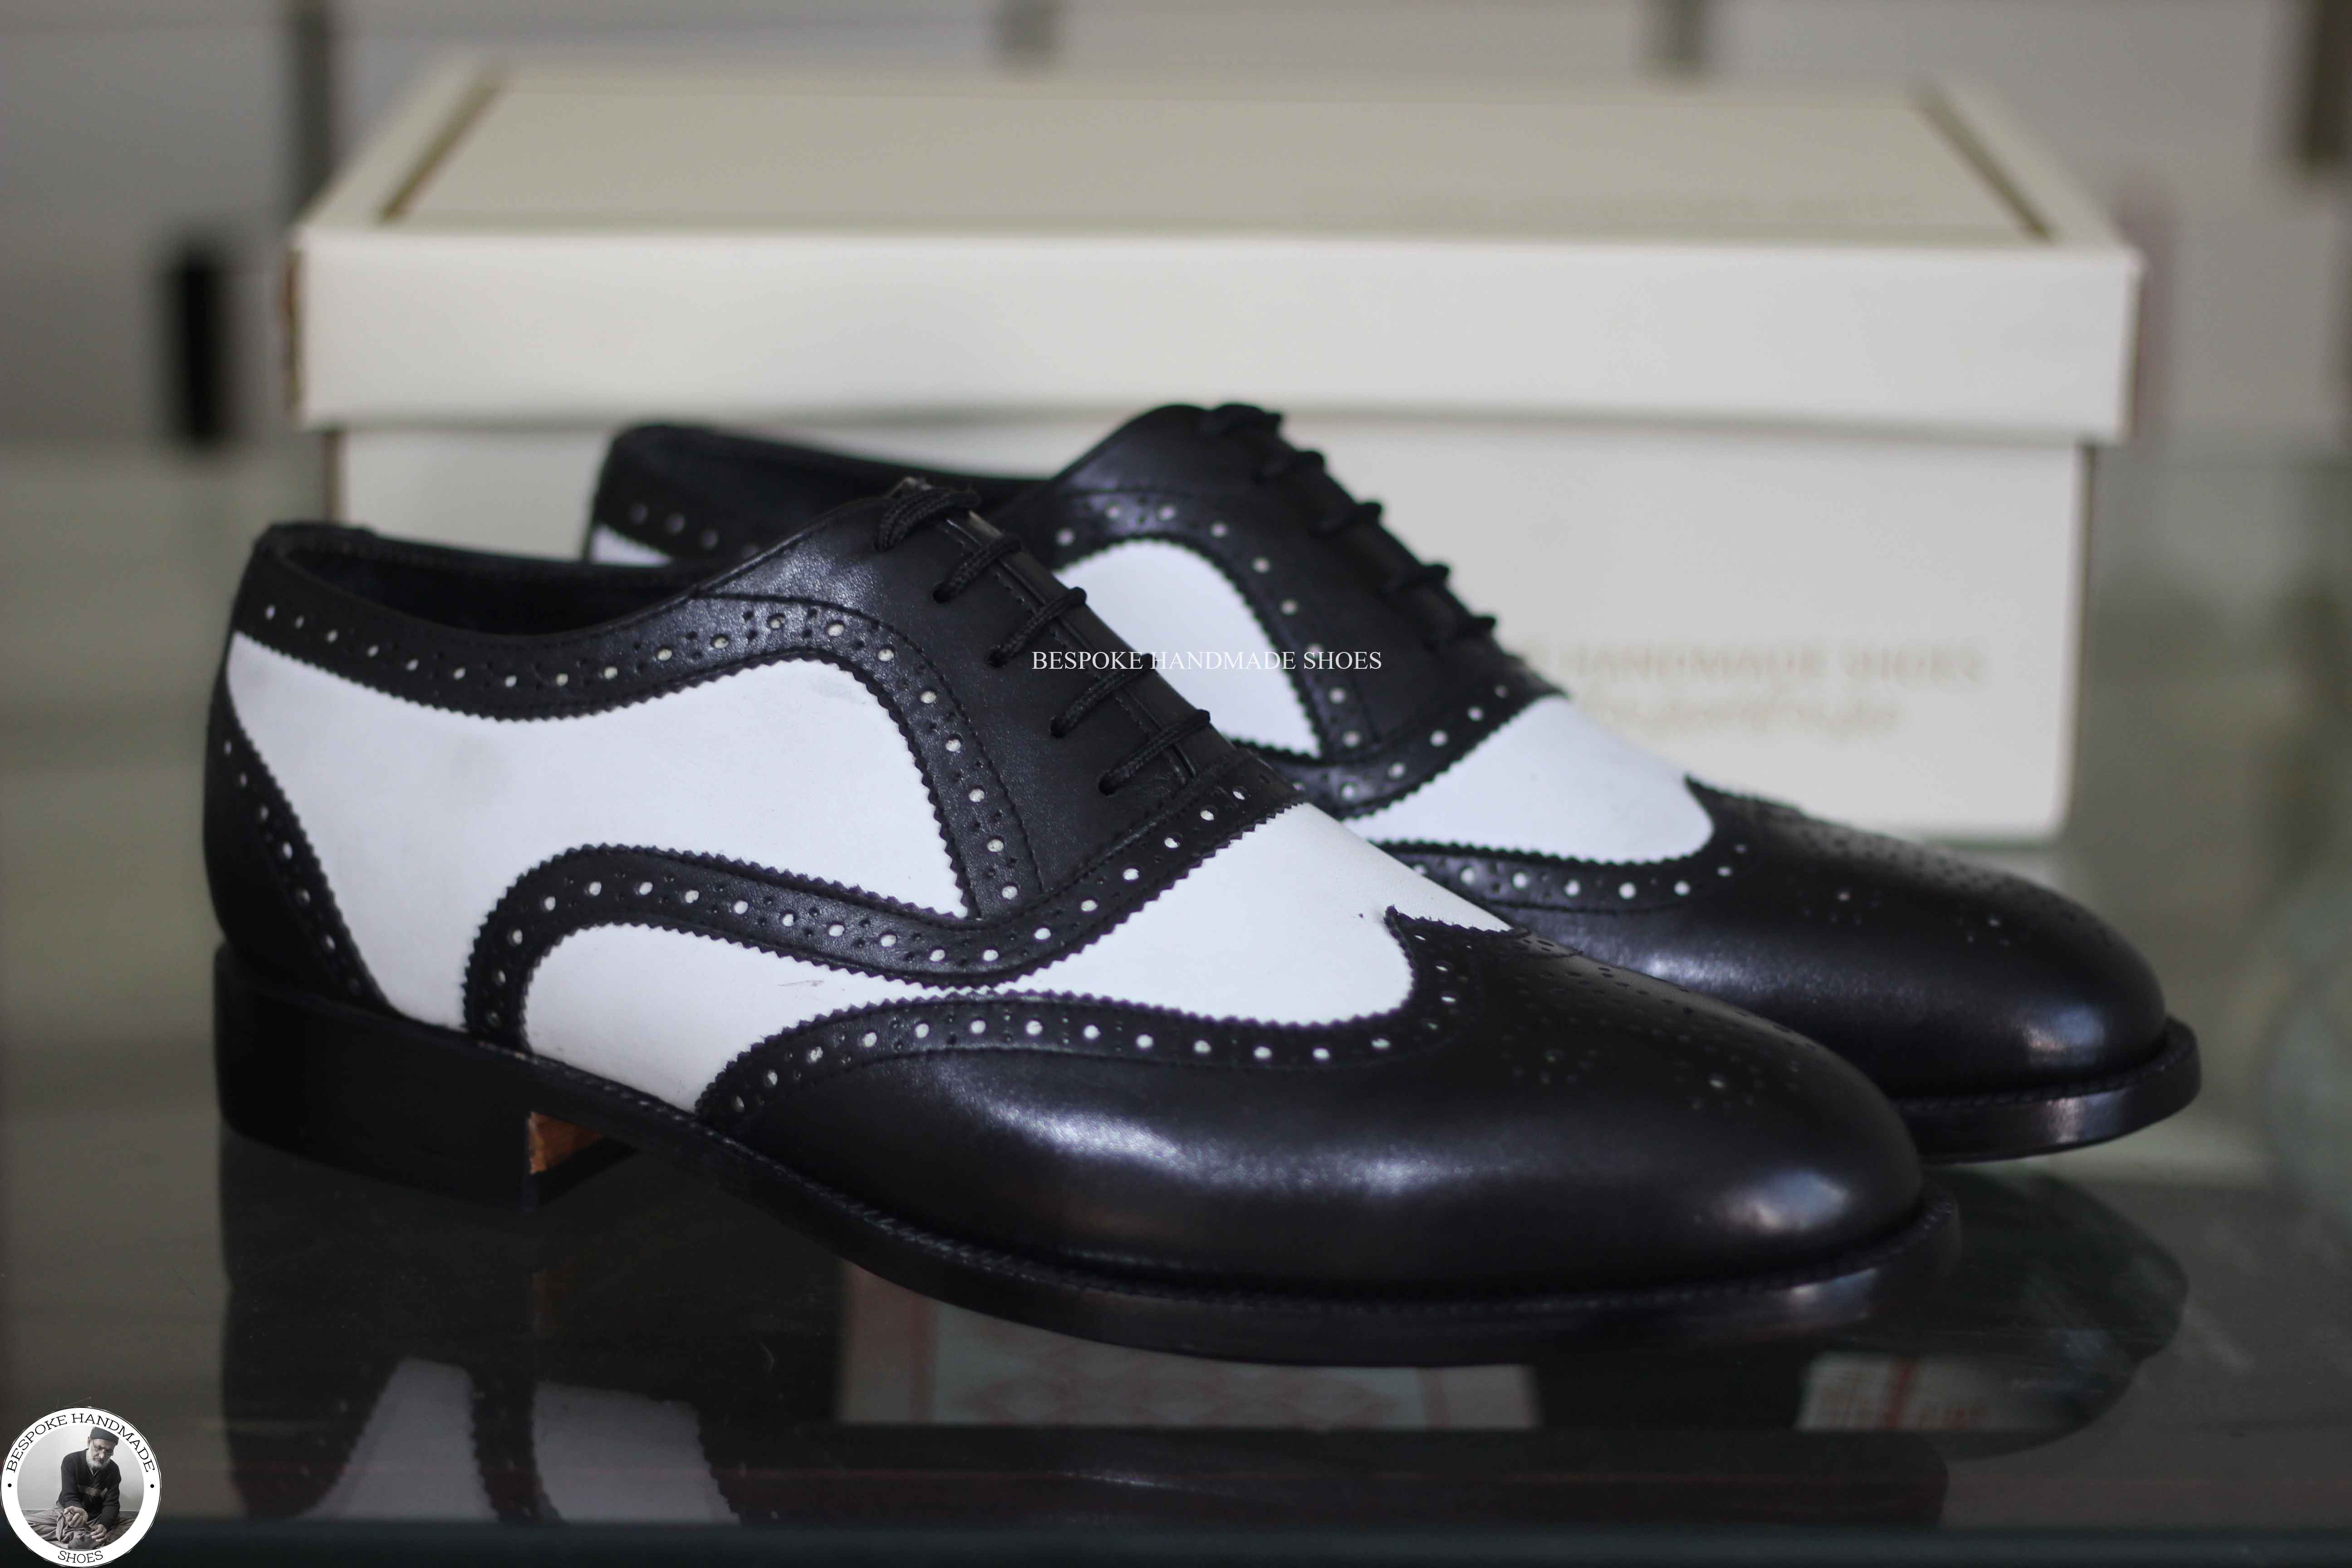 Bespoke Men's Handmade Black And White Leather Oxford Wingtip Brogue Lace Up Dress Men's Shoes